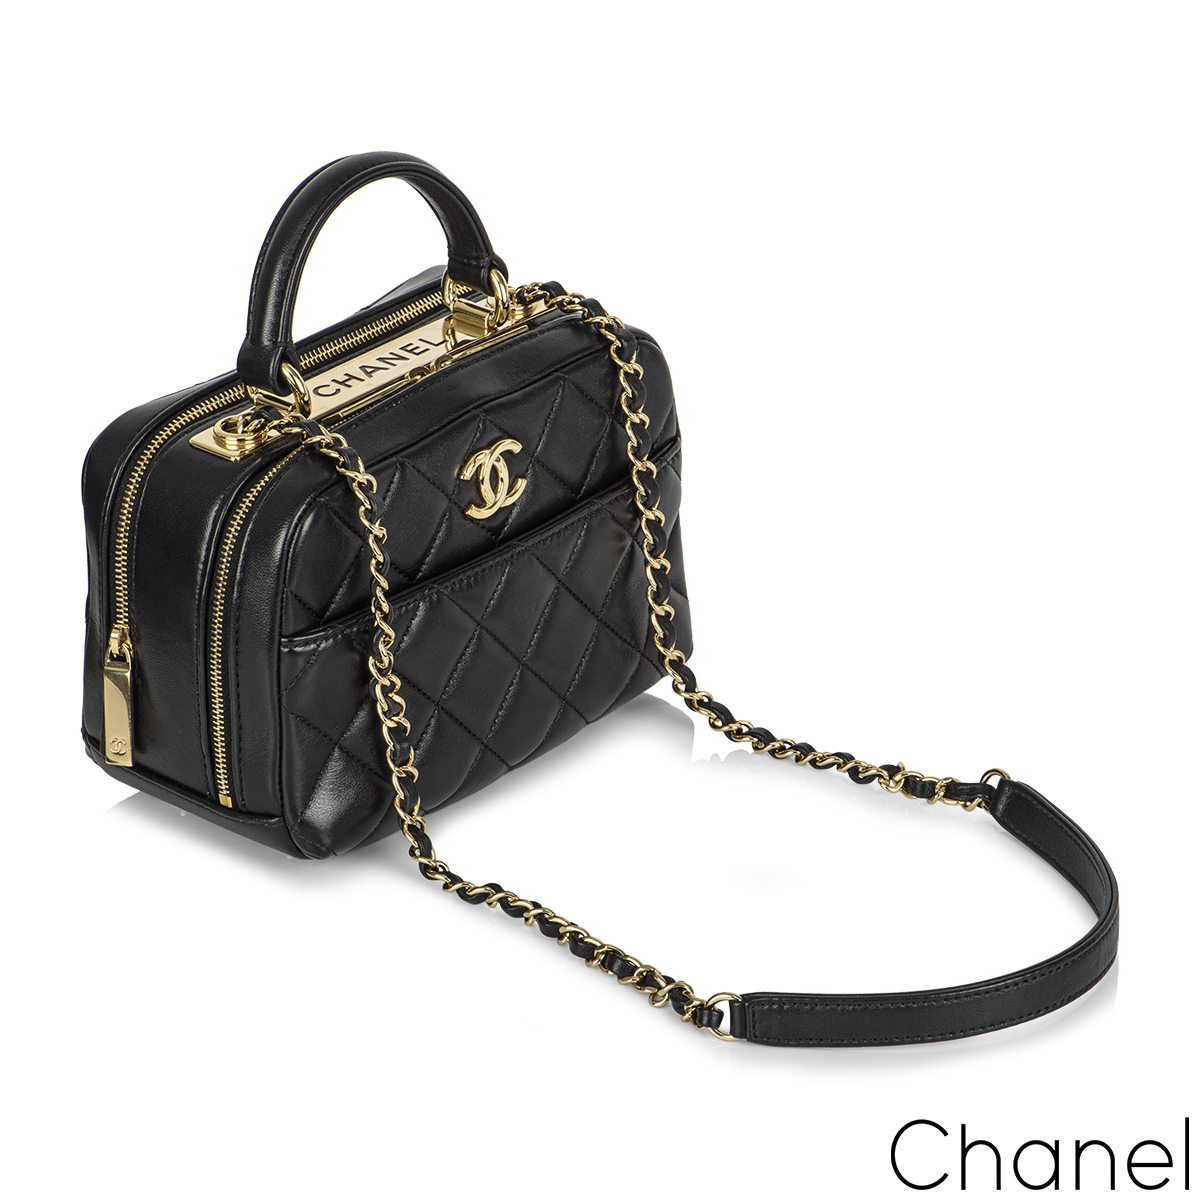 CHANEL TRENDY CC Bowling BAG WHAT FITS, 20P, 20S EARRINGS & O CASE 